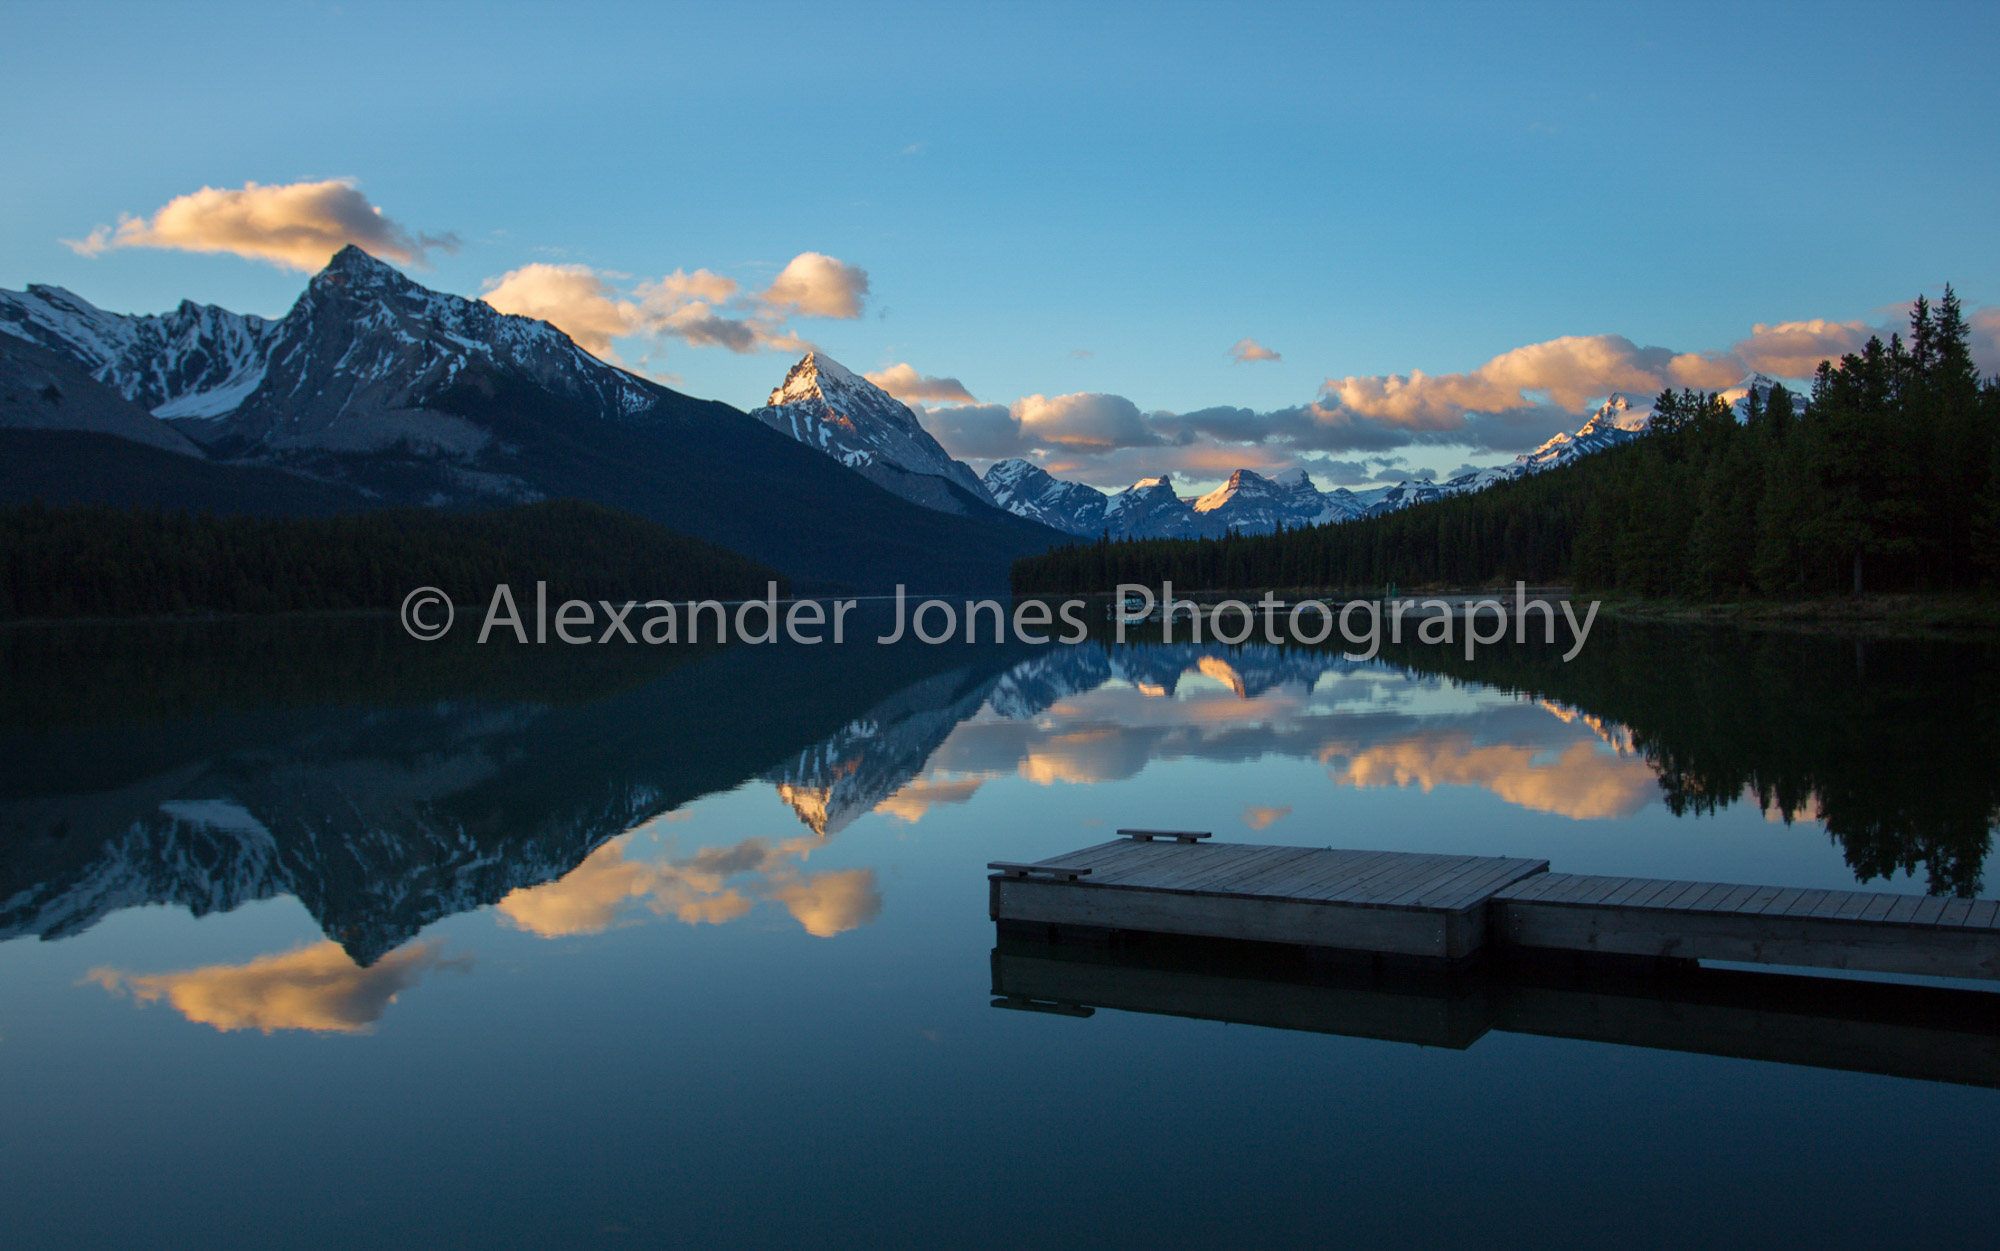 Mirror reflection during sunrise over Maligne Lake and pier in Jasper National Park in Canadian Rocky Mountains